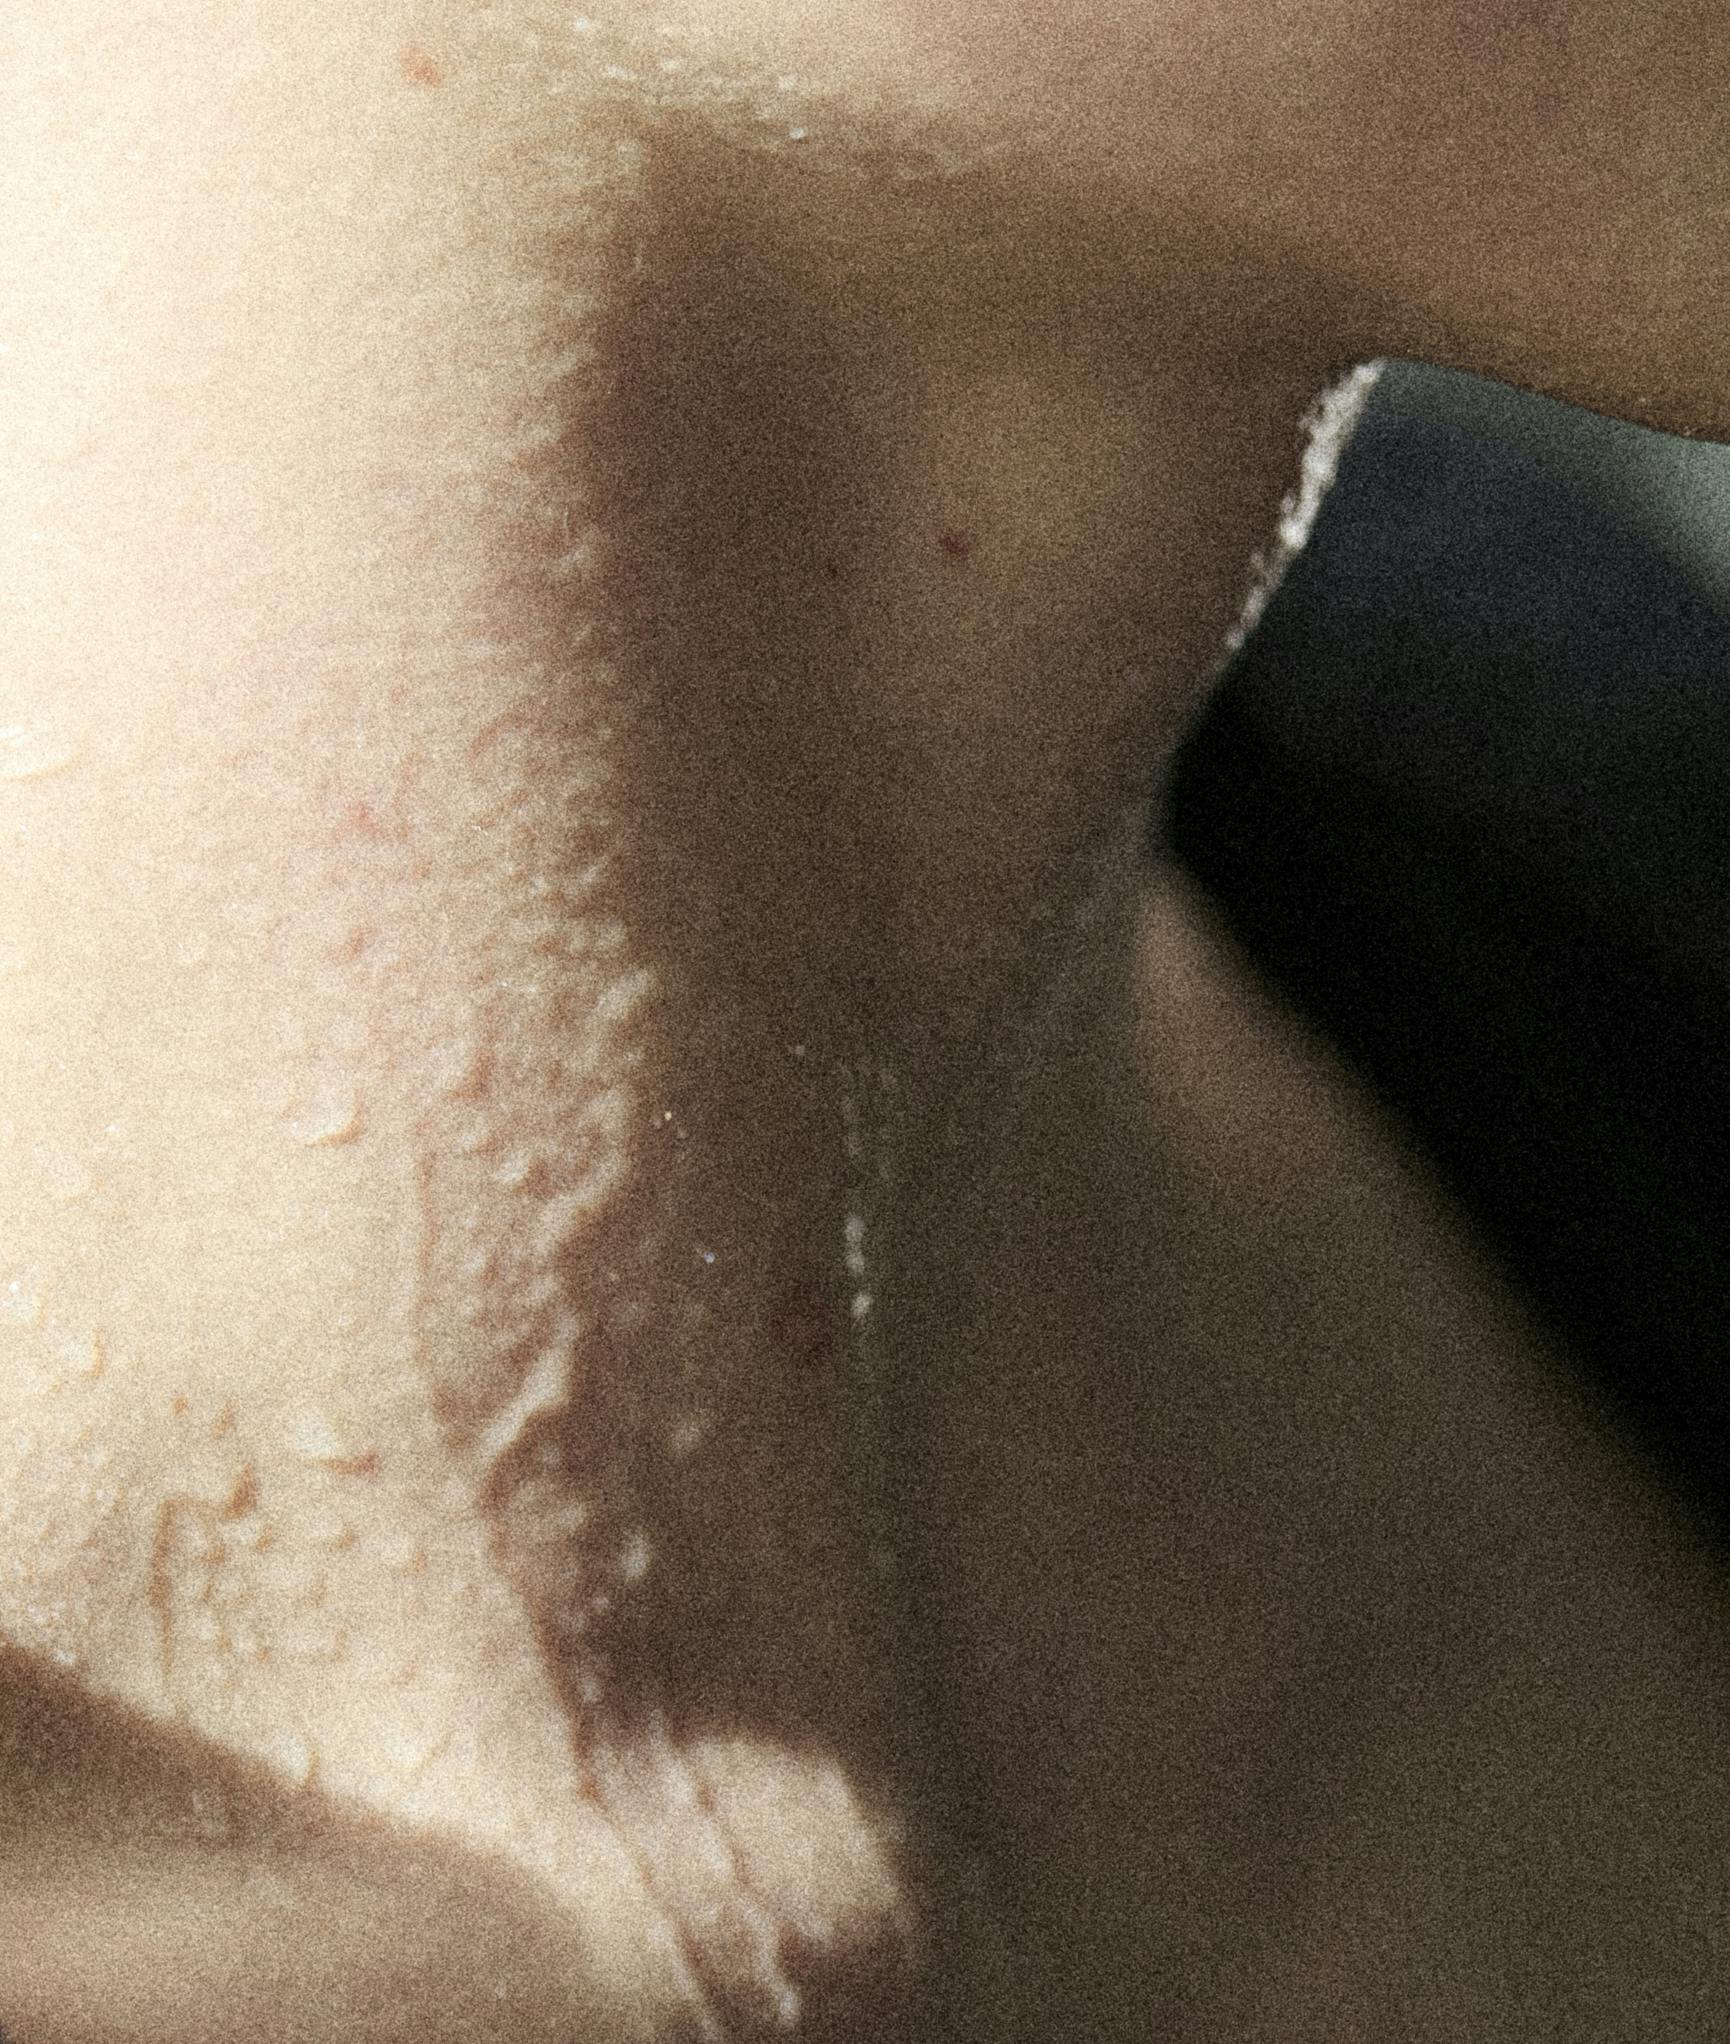 A model's neck wet with sweat